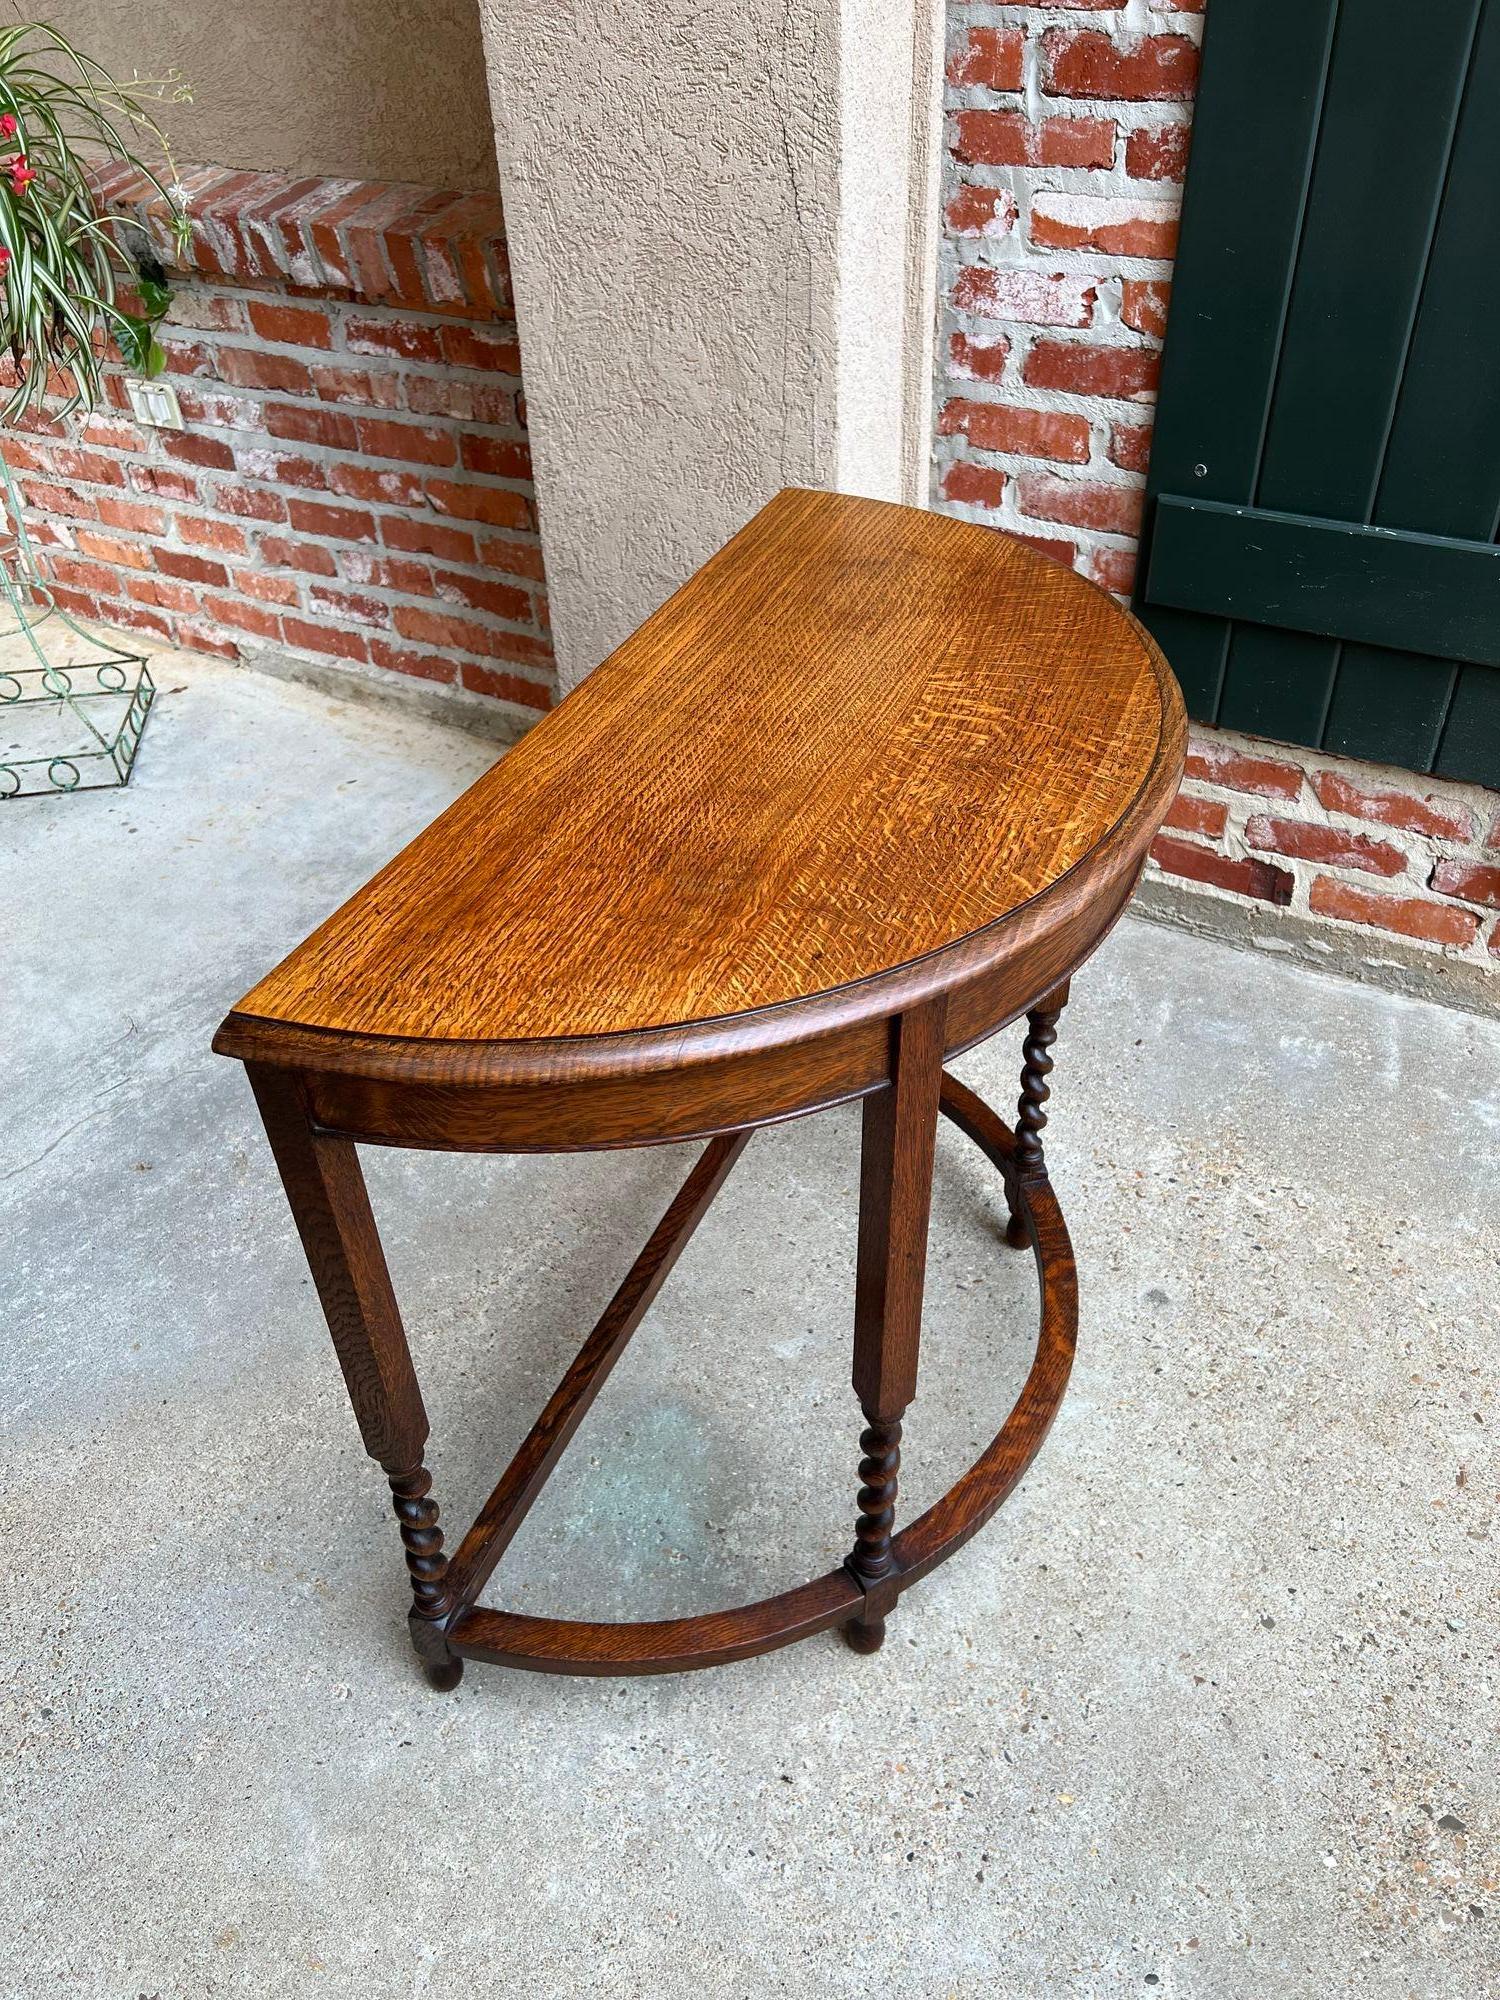 Antique English Demilune Console Hall Table Barley Twist Oak c1940.

Direct from England, a lovely British console table with a demilune or “half moon” shape.
Classic English style with a beveled edge oak tabletop over the wide, curved apron. Four